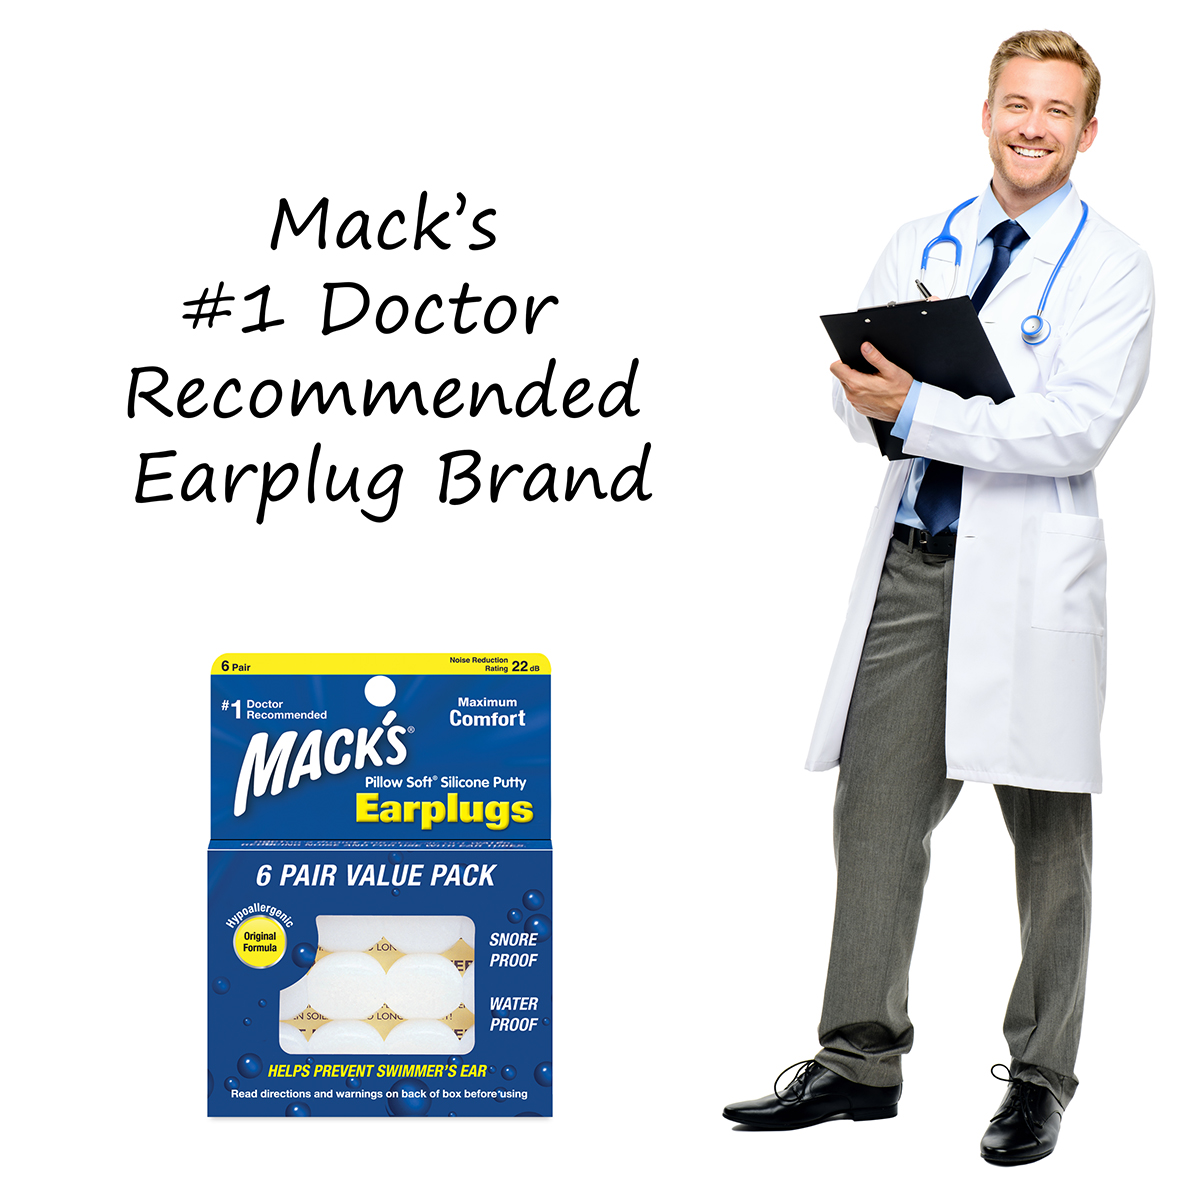 Mack's is the #1 Doctor Recommended Earplug Brand